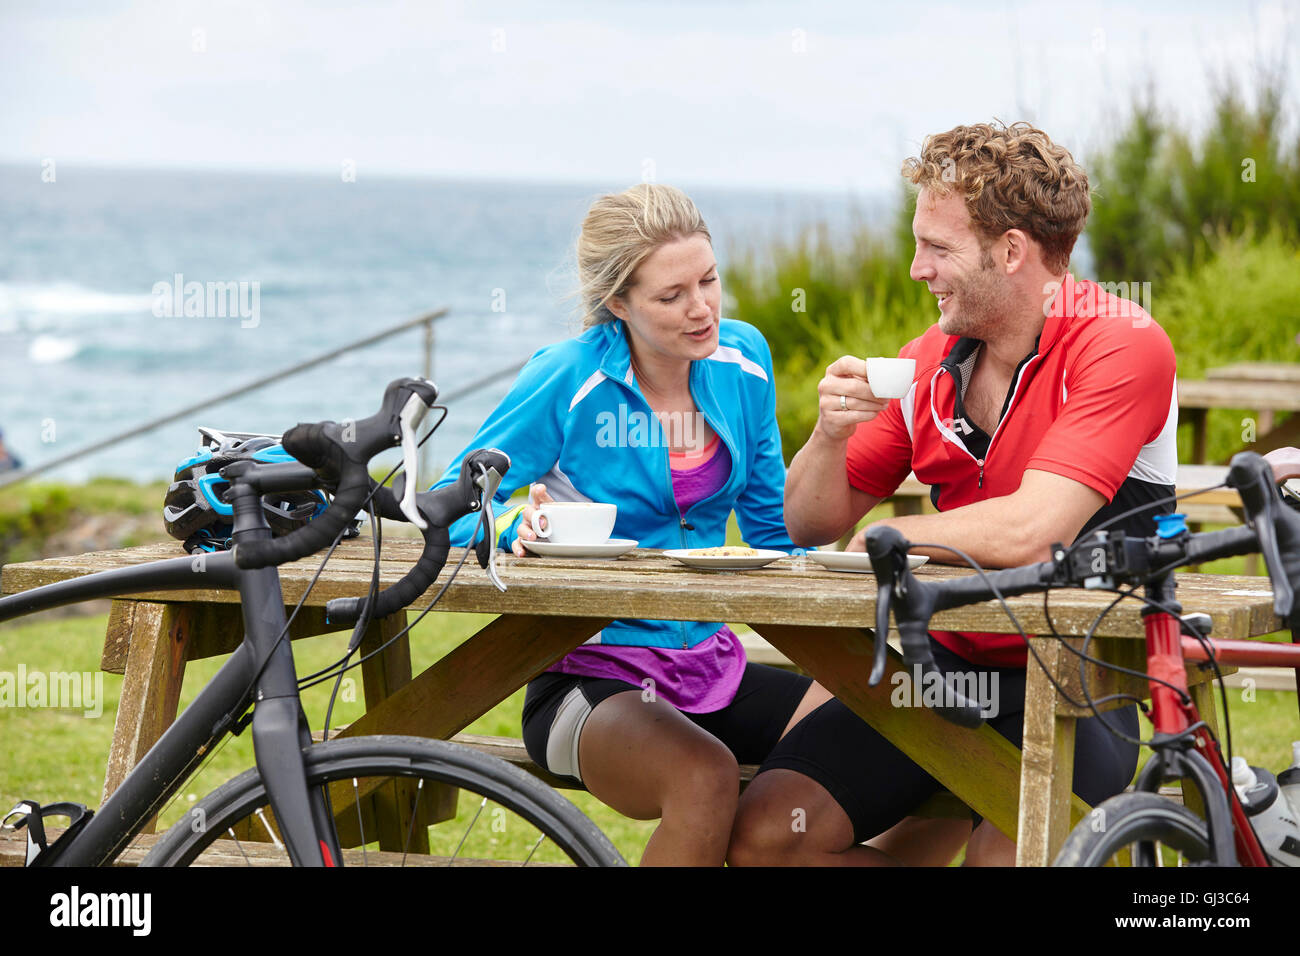 Cyclists relaxing at picnic table overlooking ocean Stock Photo